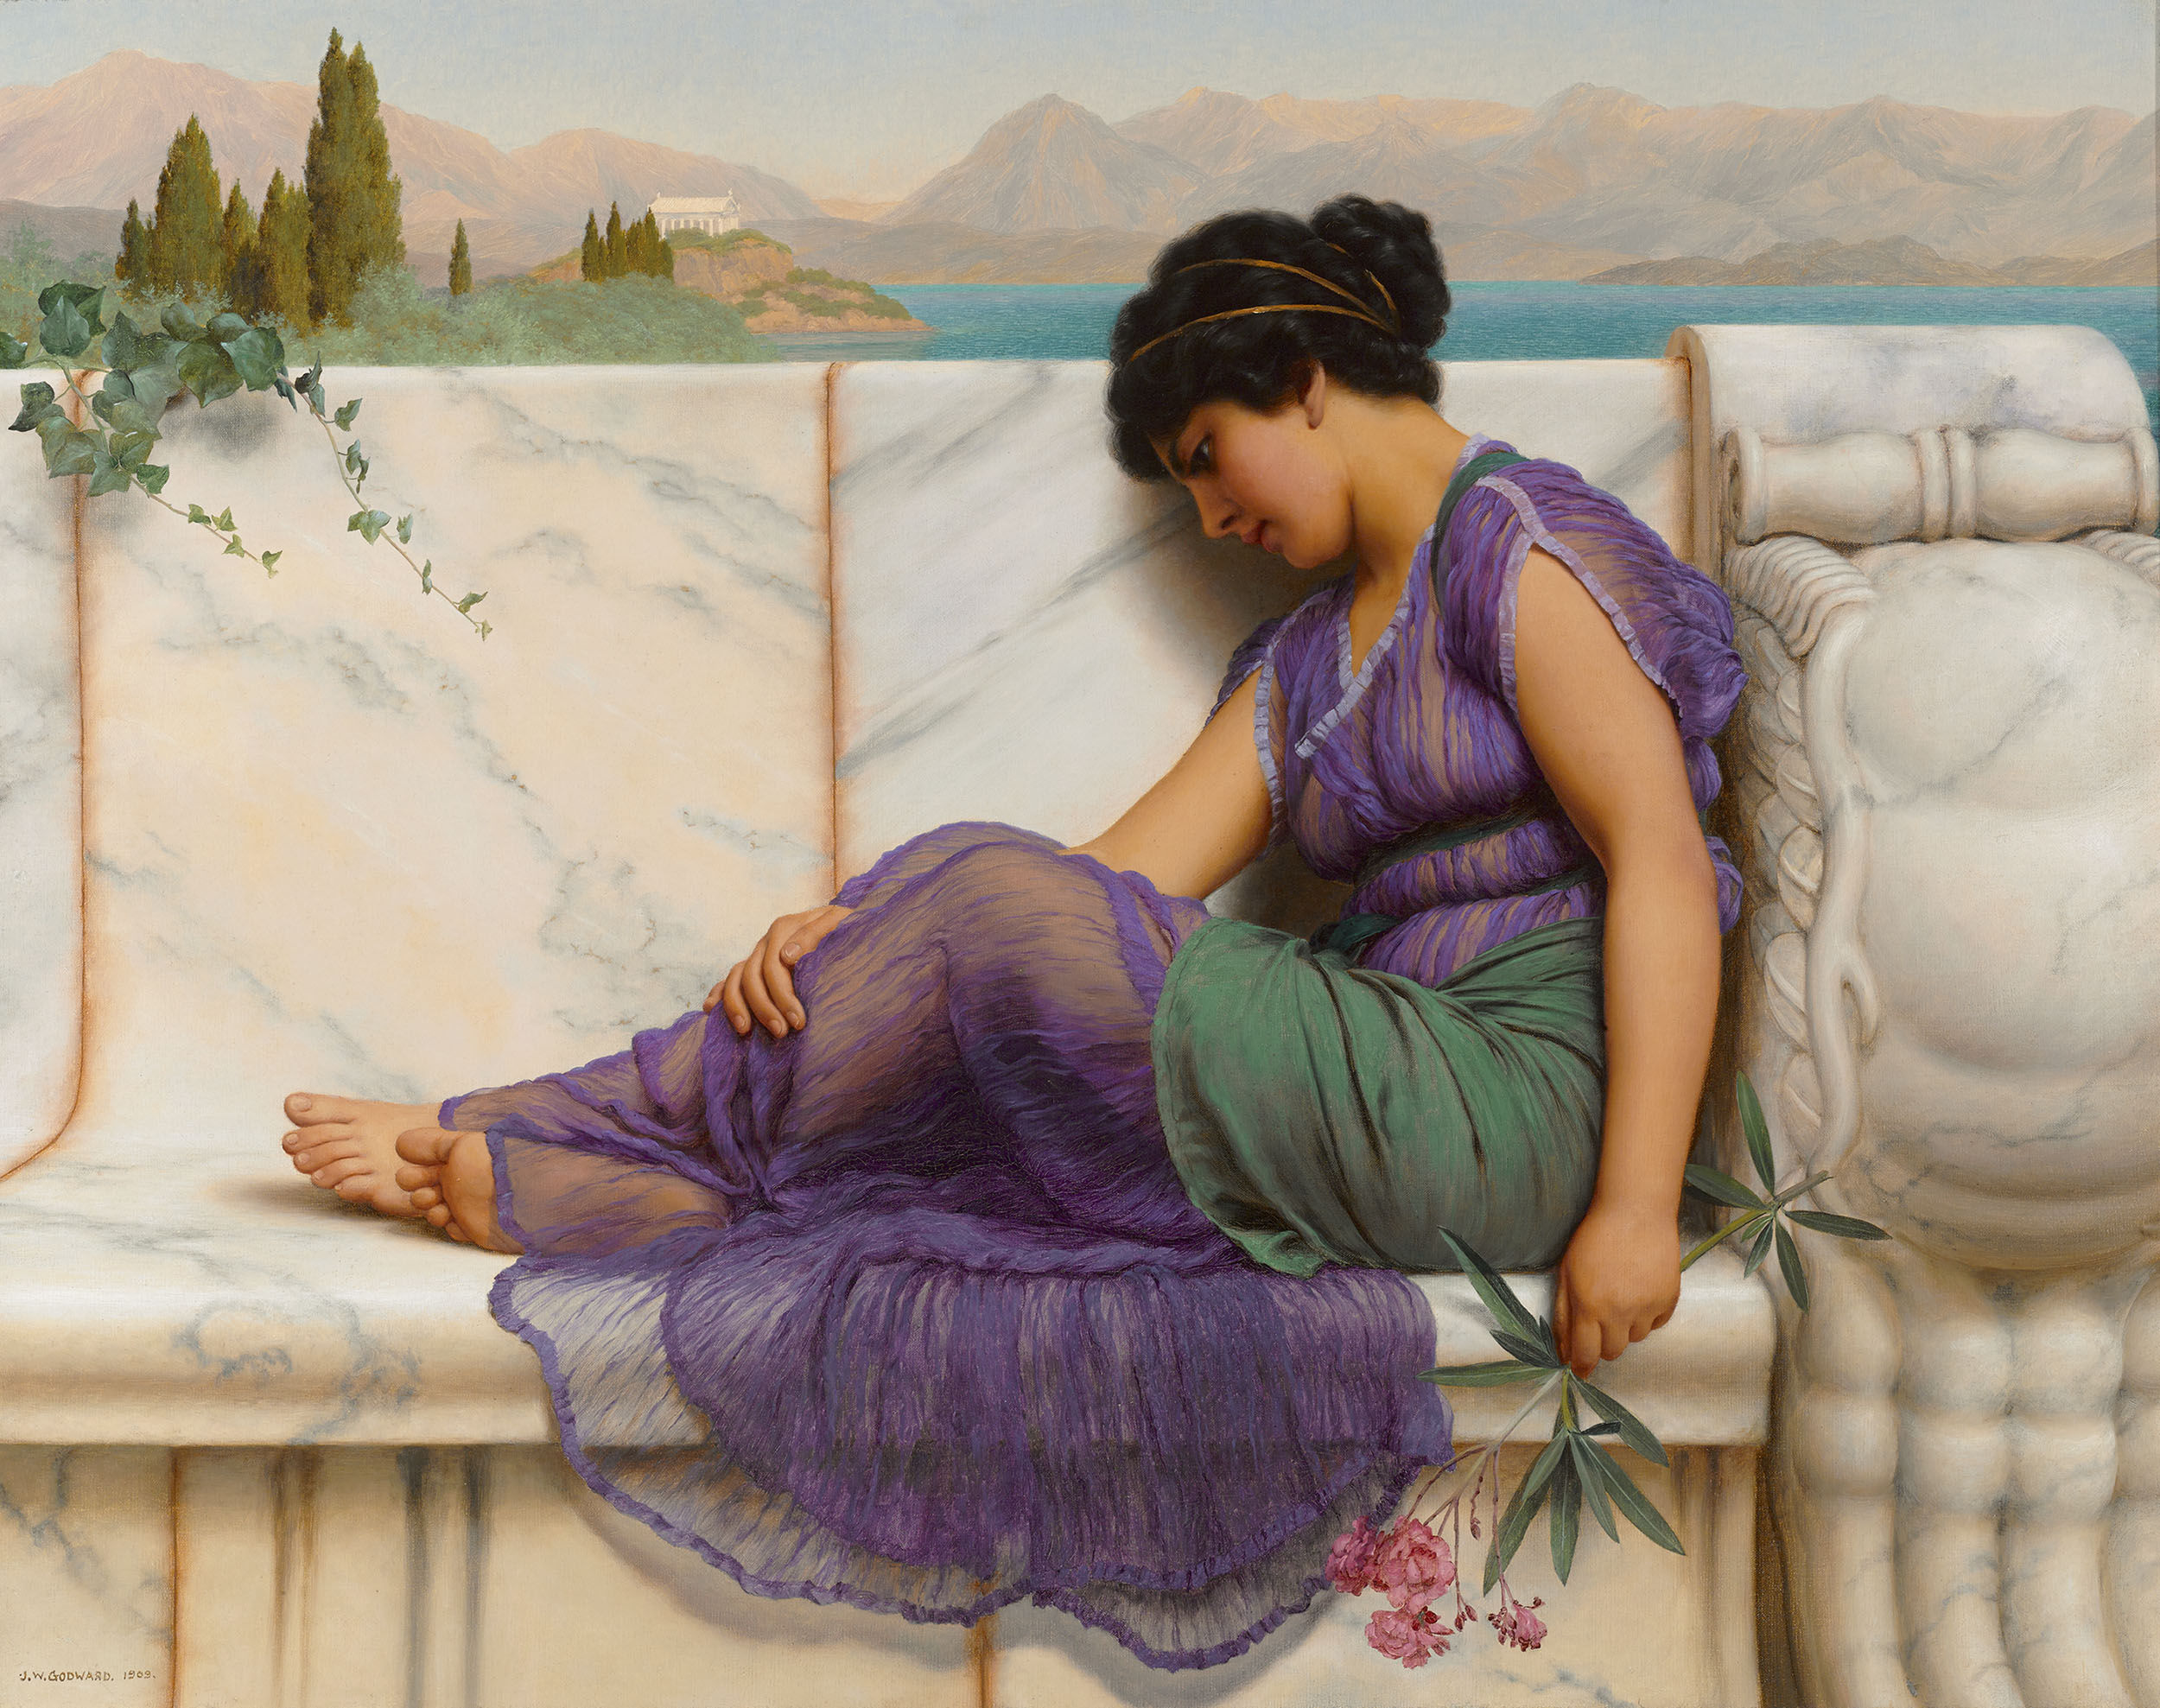 Day Dreaming by John William Godward - 1909 - 58.4 × 73.7 cm private collection